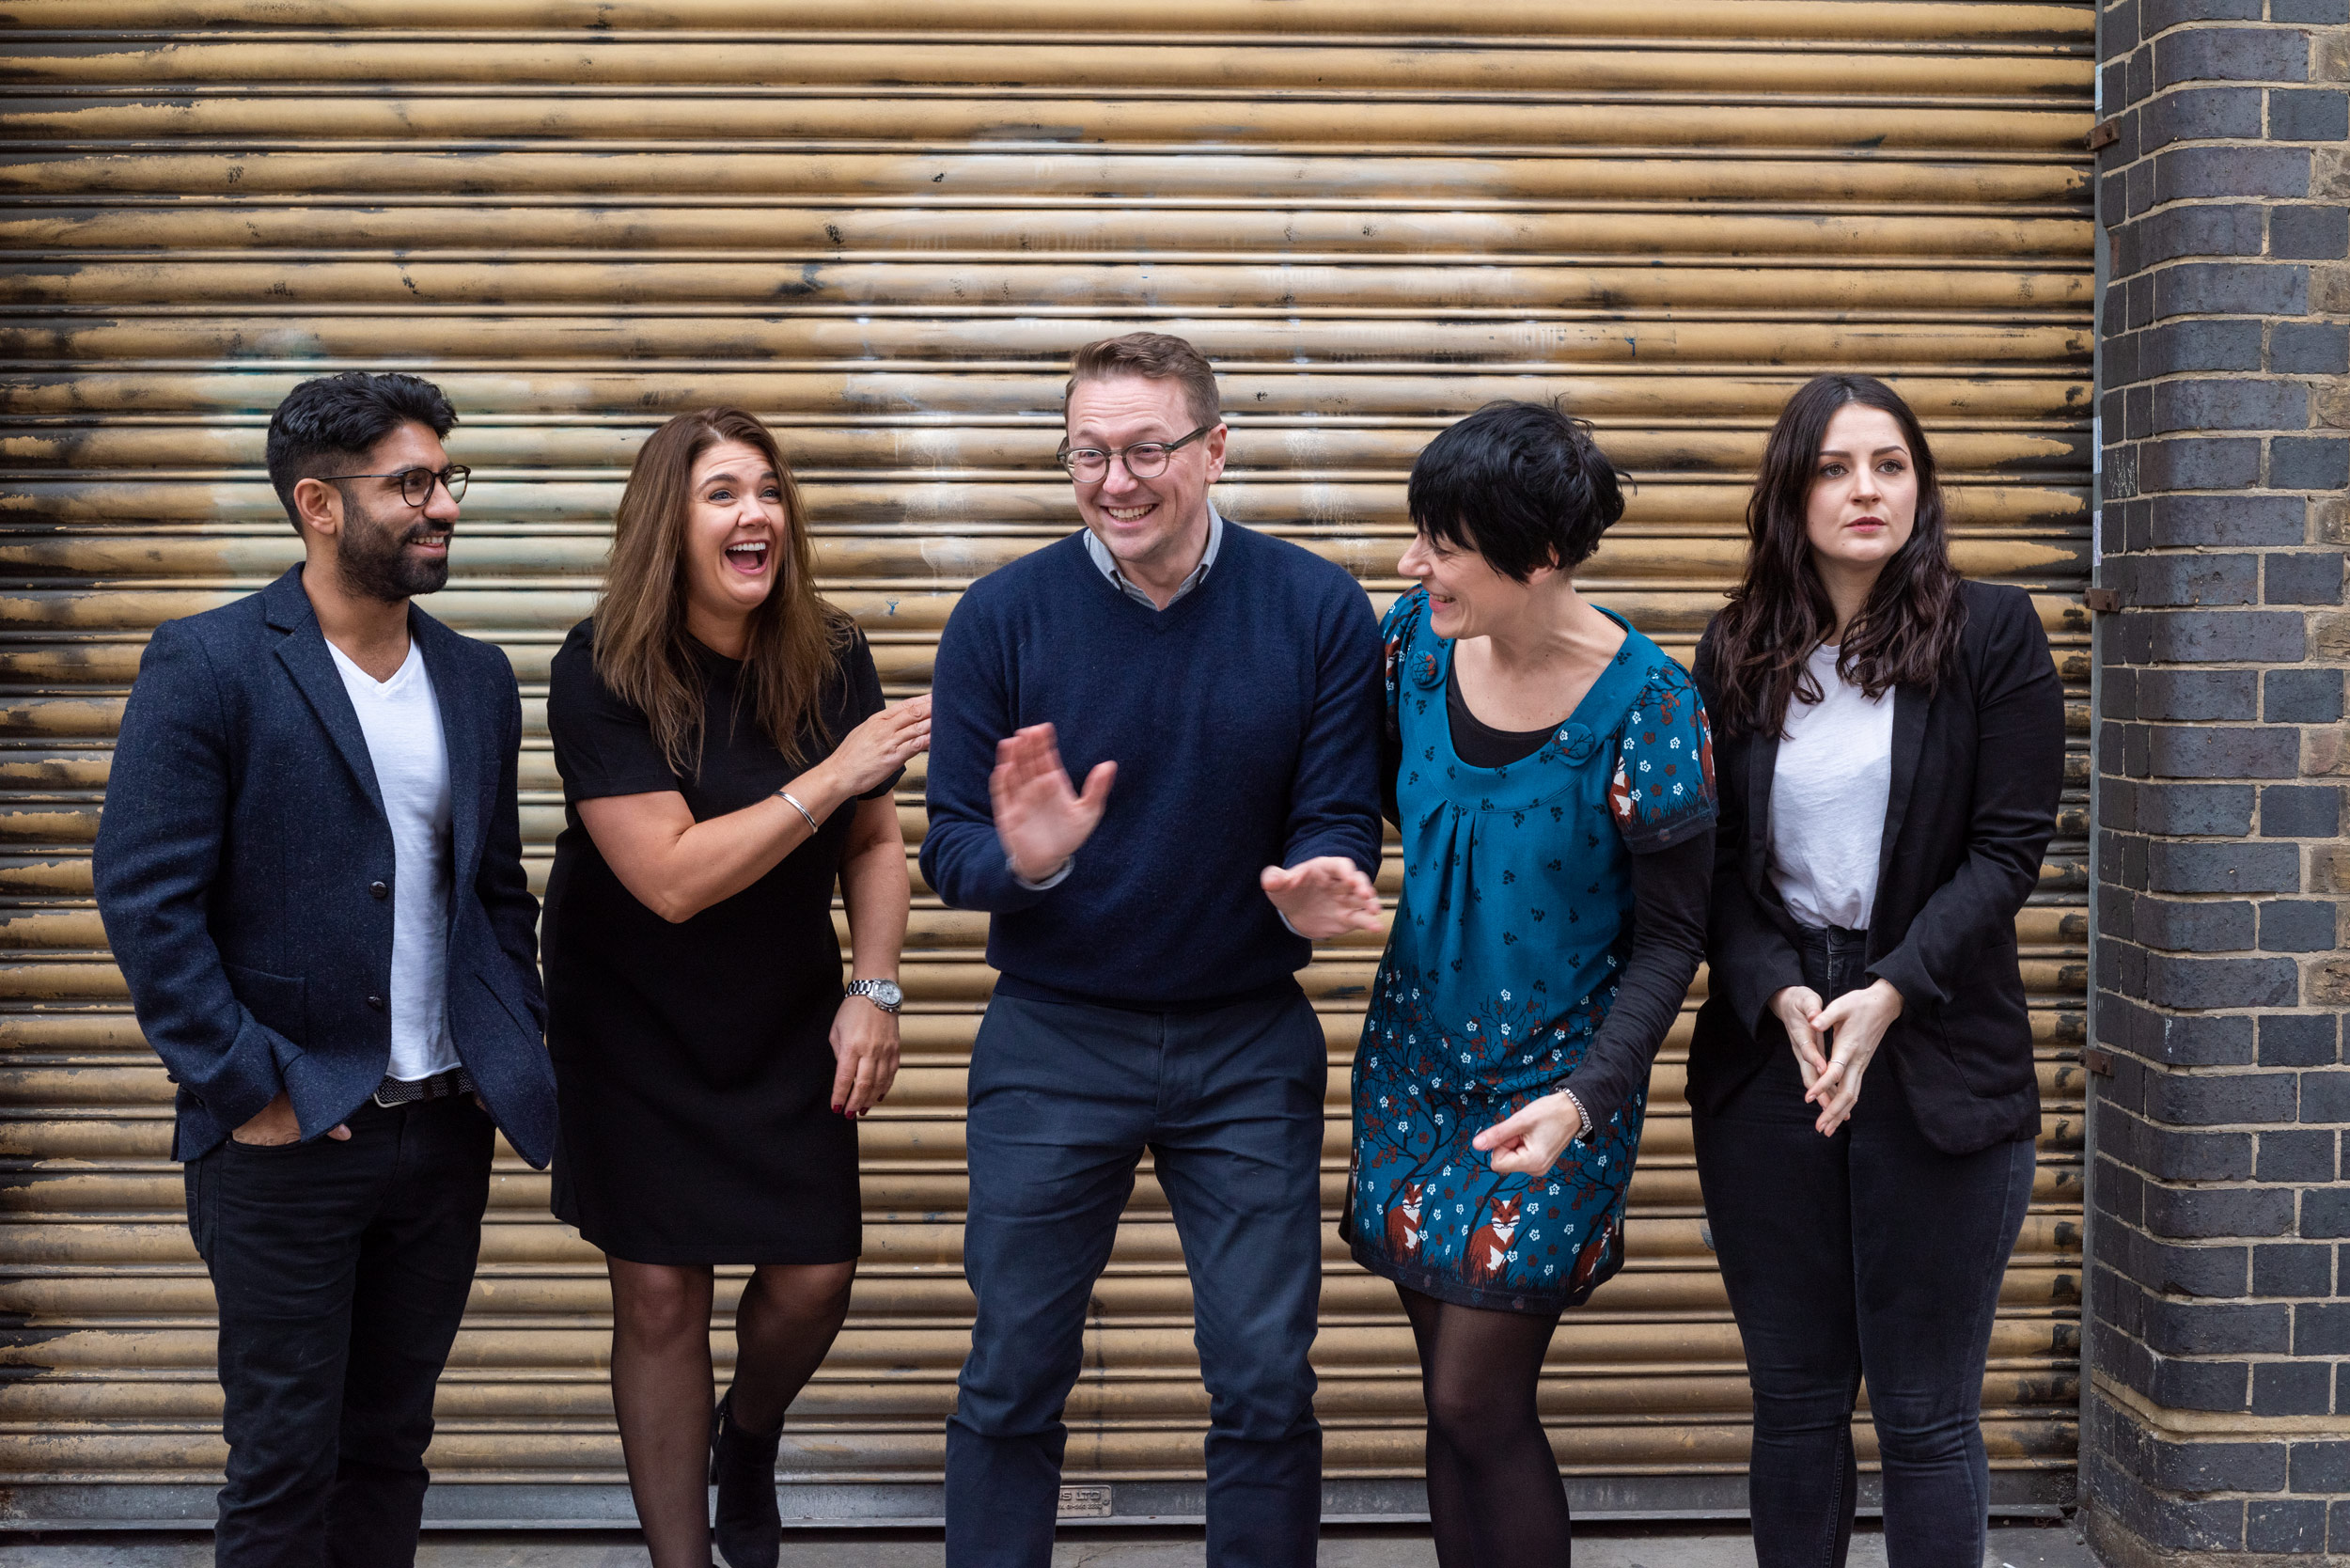 A FUNNY OUTTAKE GROUP POSED SHOT OF THE TEAM MEMBERS OFTHE CREATIVE RECRUITMENT AGENCY OWL INC 